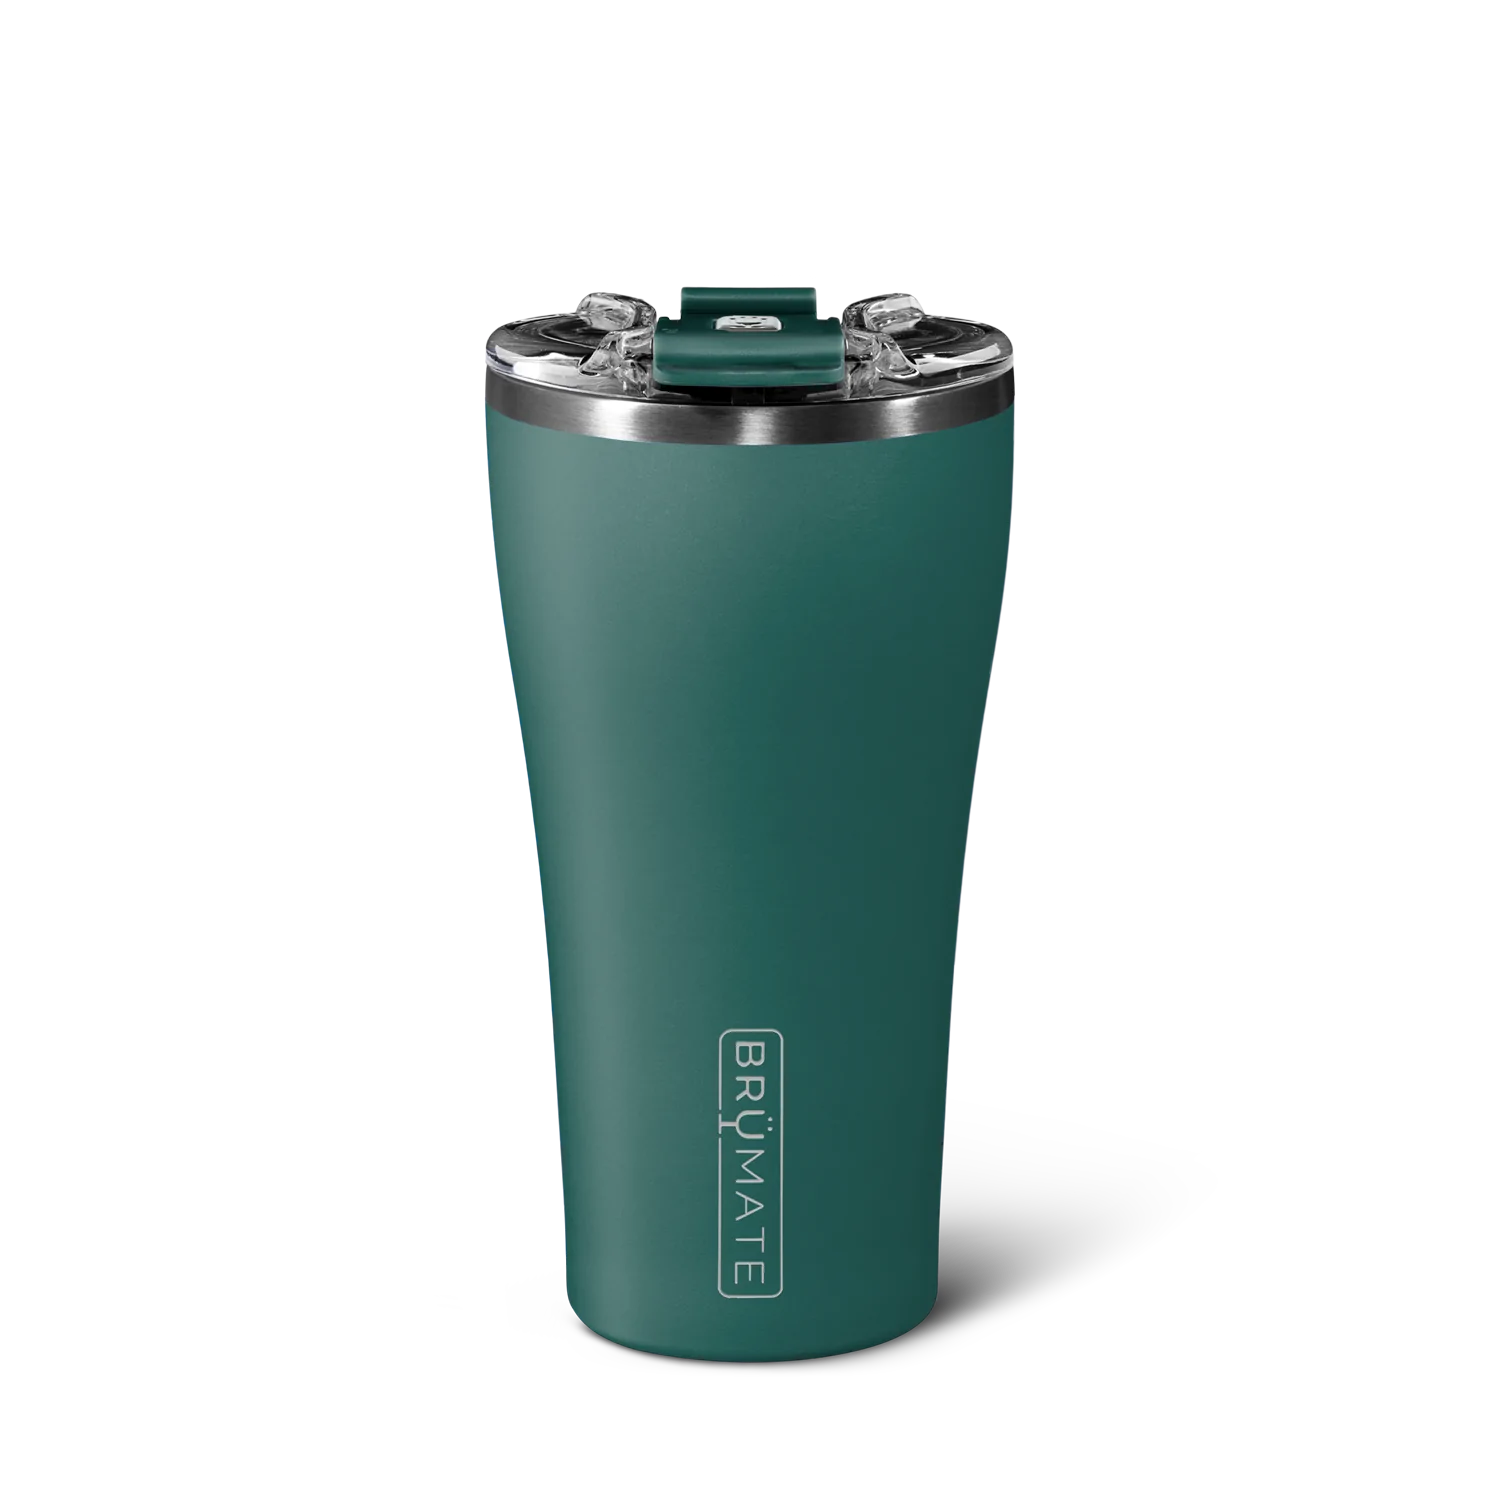 brumate 5 different cups and accessories